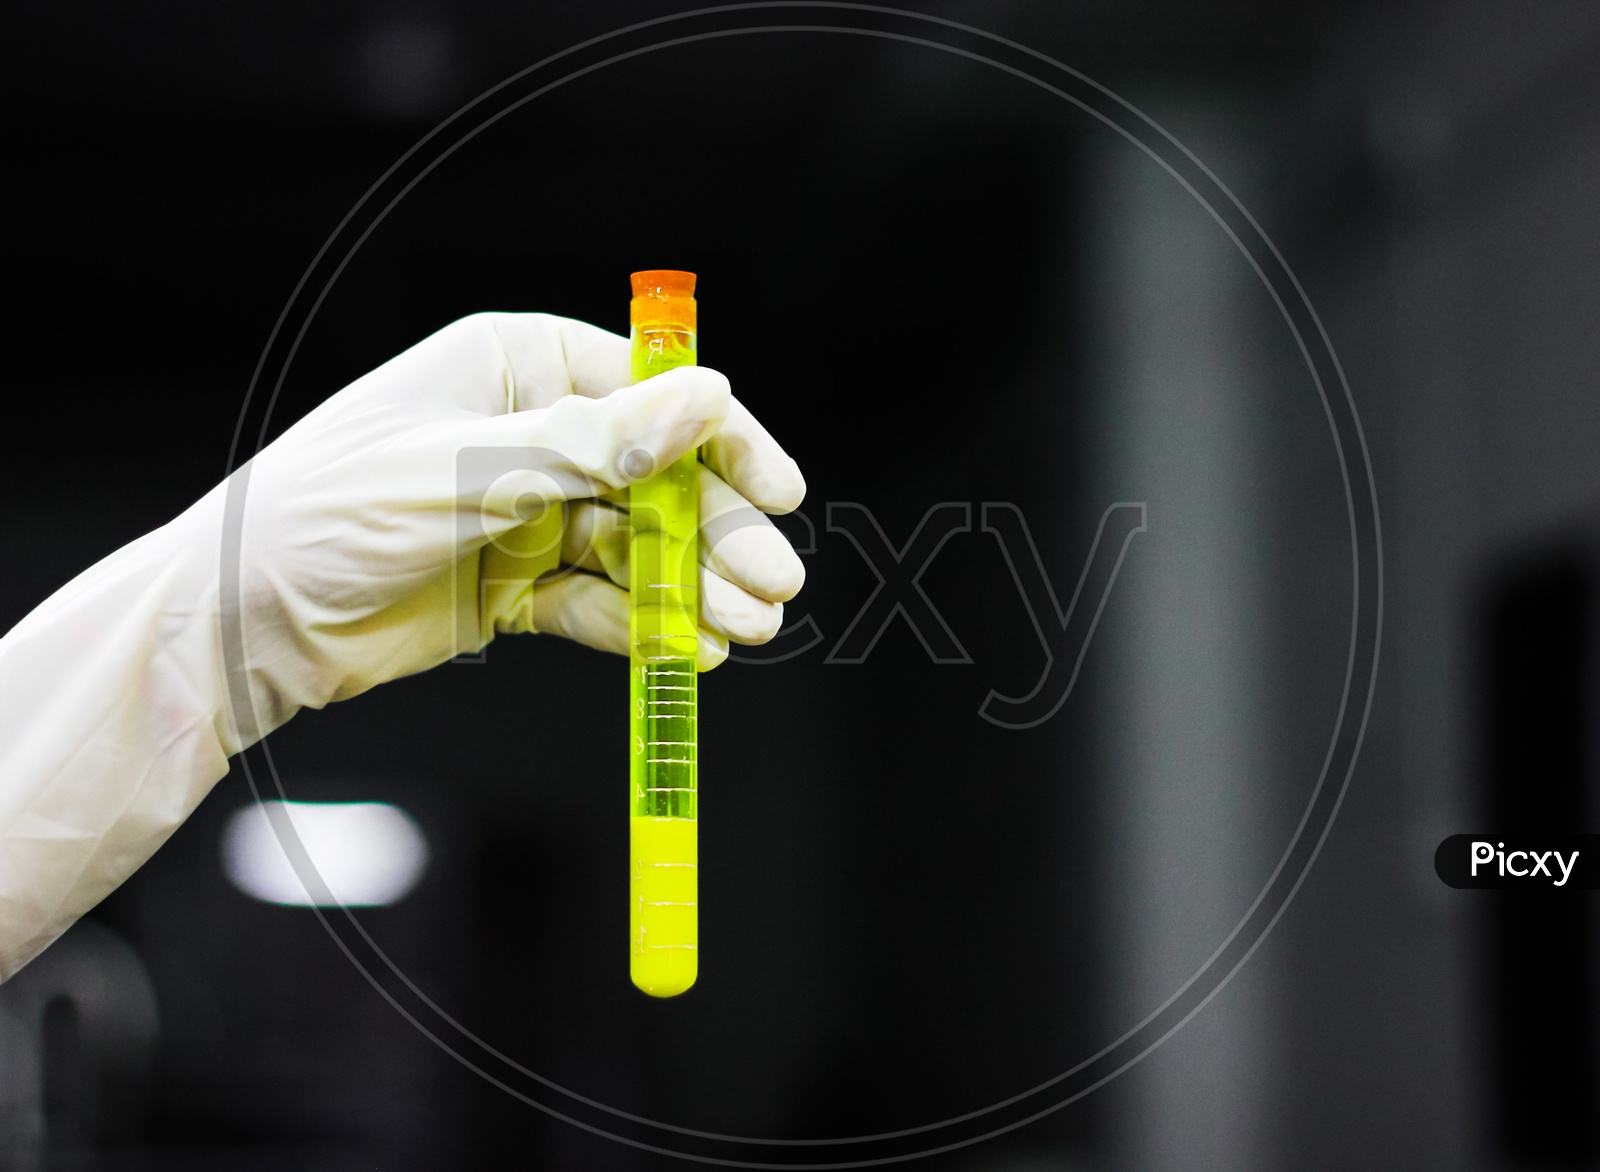 Scientist Holding Albuminometer Containing Yellow Solution With A Cork A Gloved Hand In Chemistry Laboratory